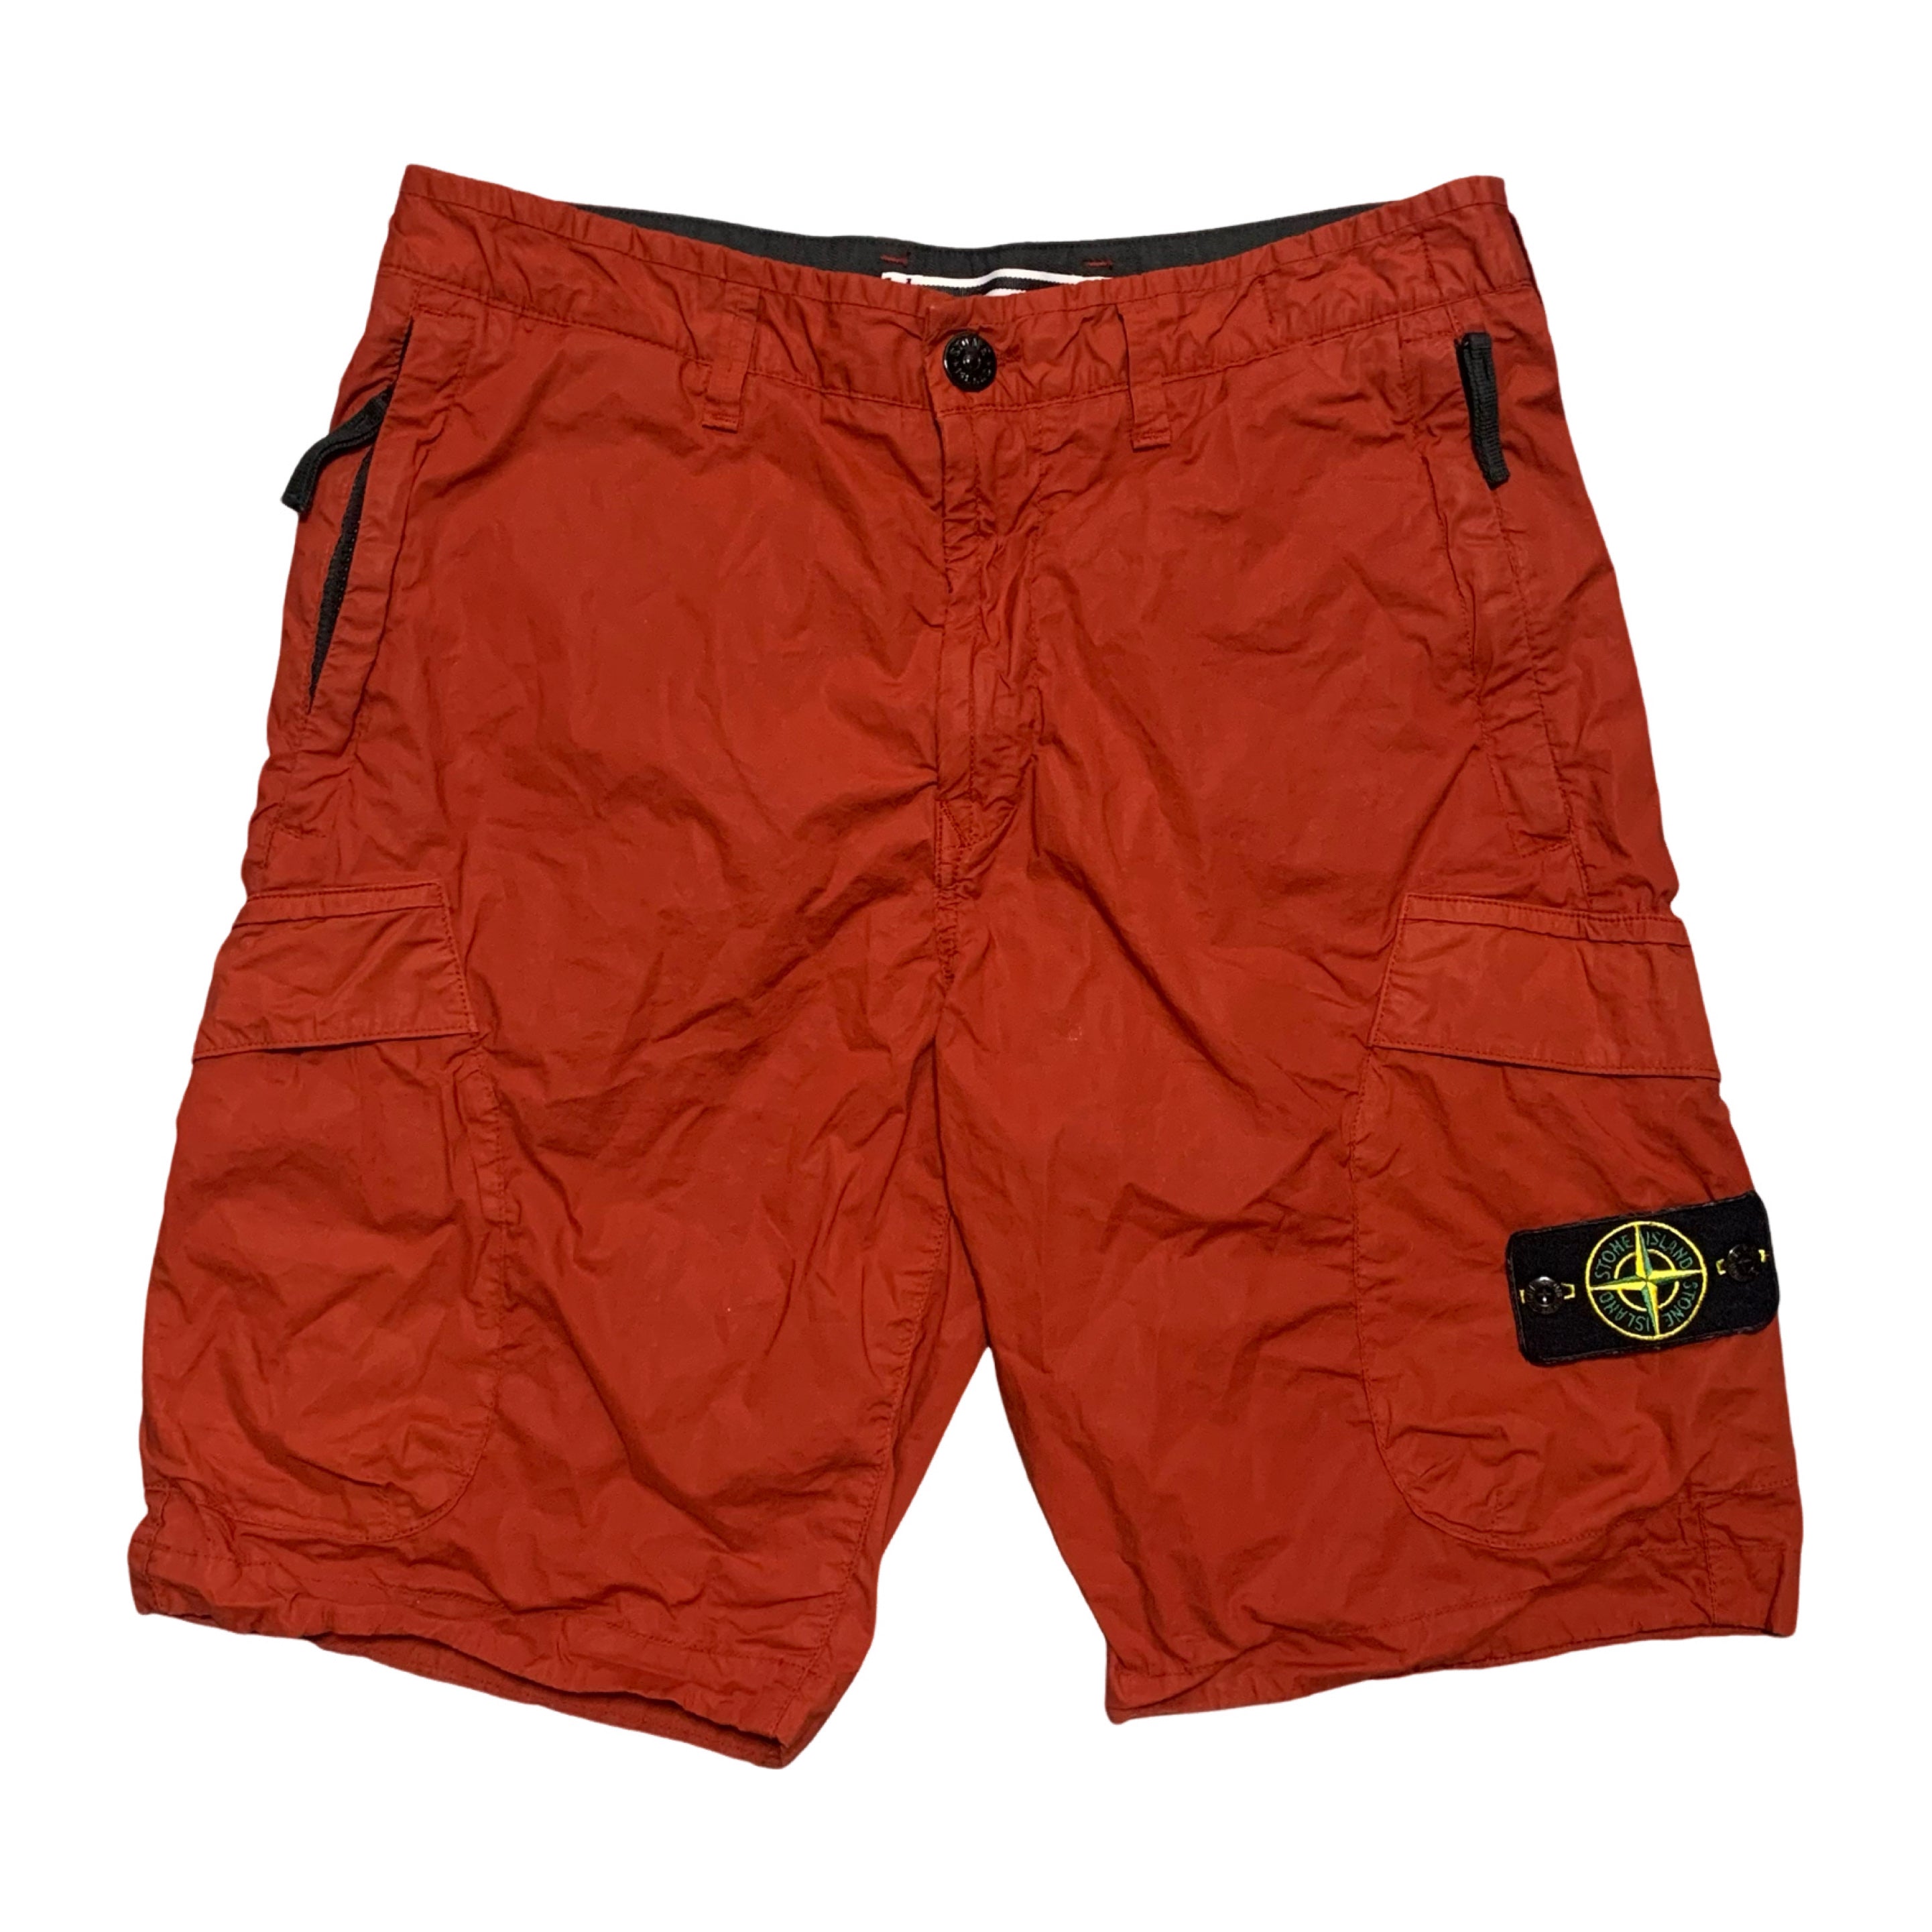 Stone Island Shorts Red Garment Dyed Cotton Cargo Shorts Bottoms Small W30